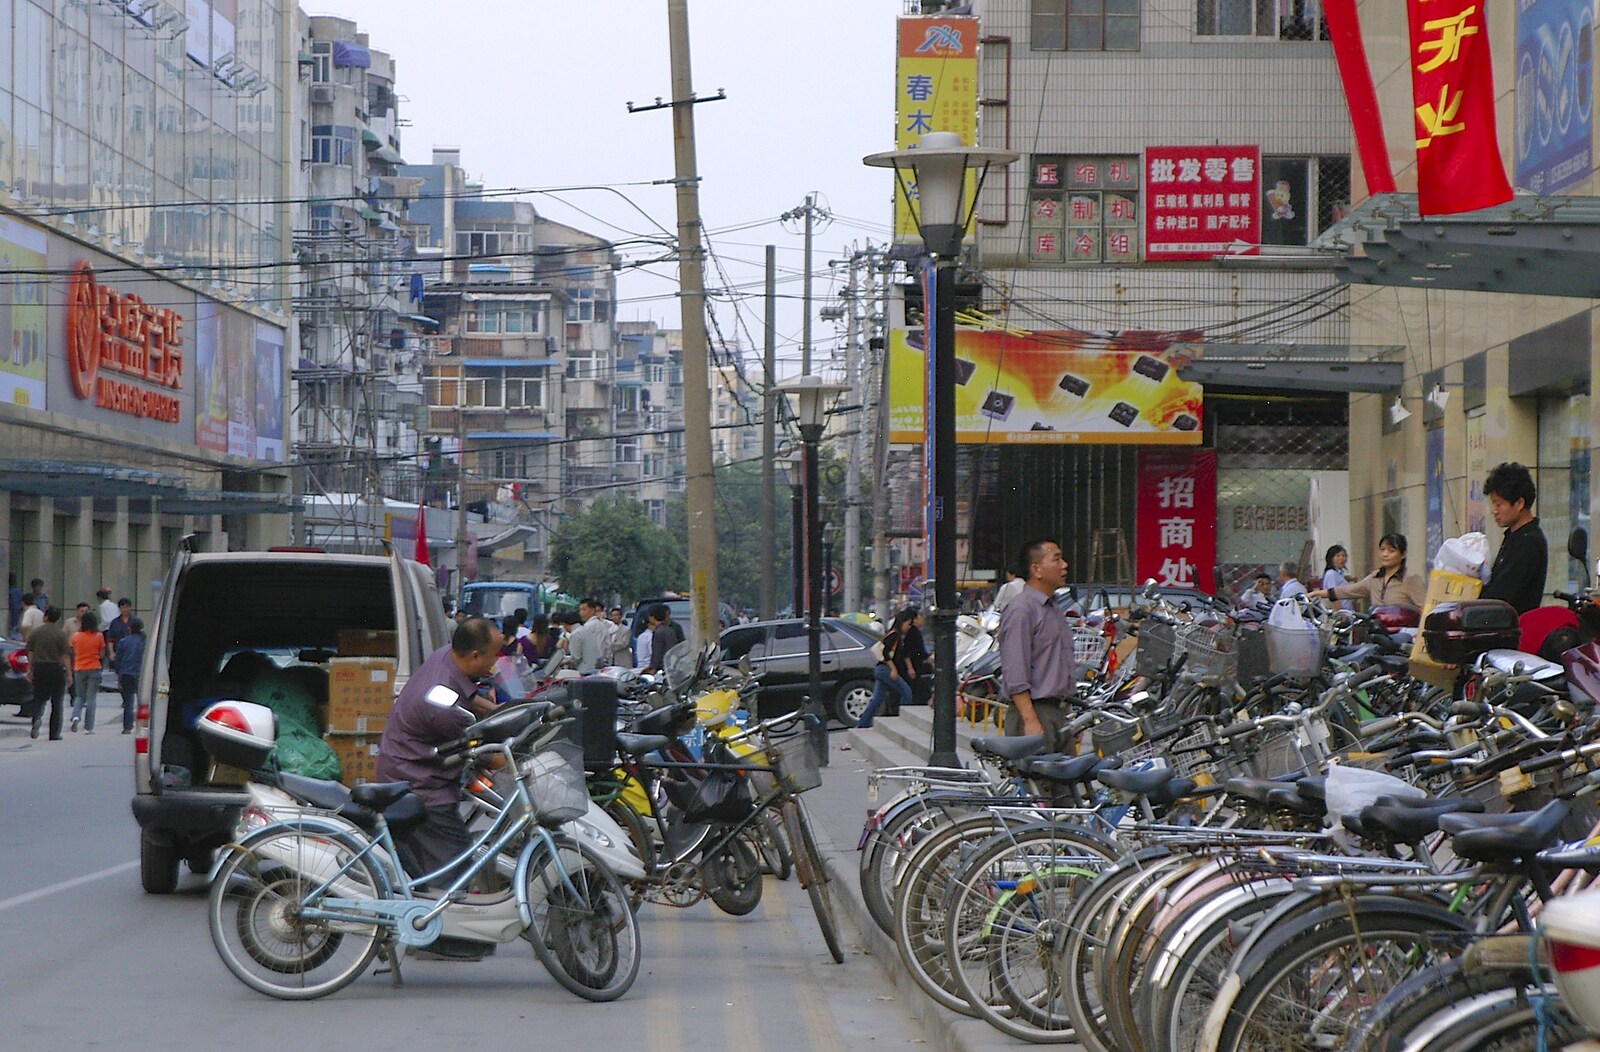 A load of parked bikes from A Few Days in Nanjing, Jiangsu Province, China - 7th October 2006